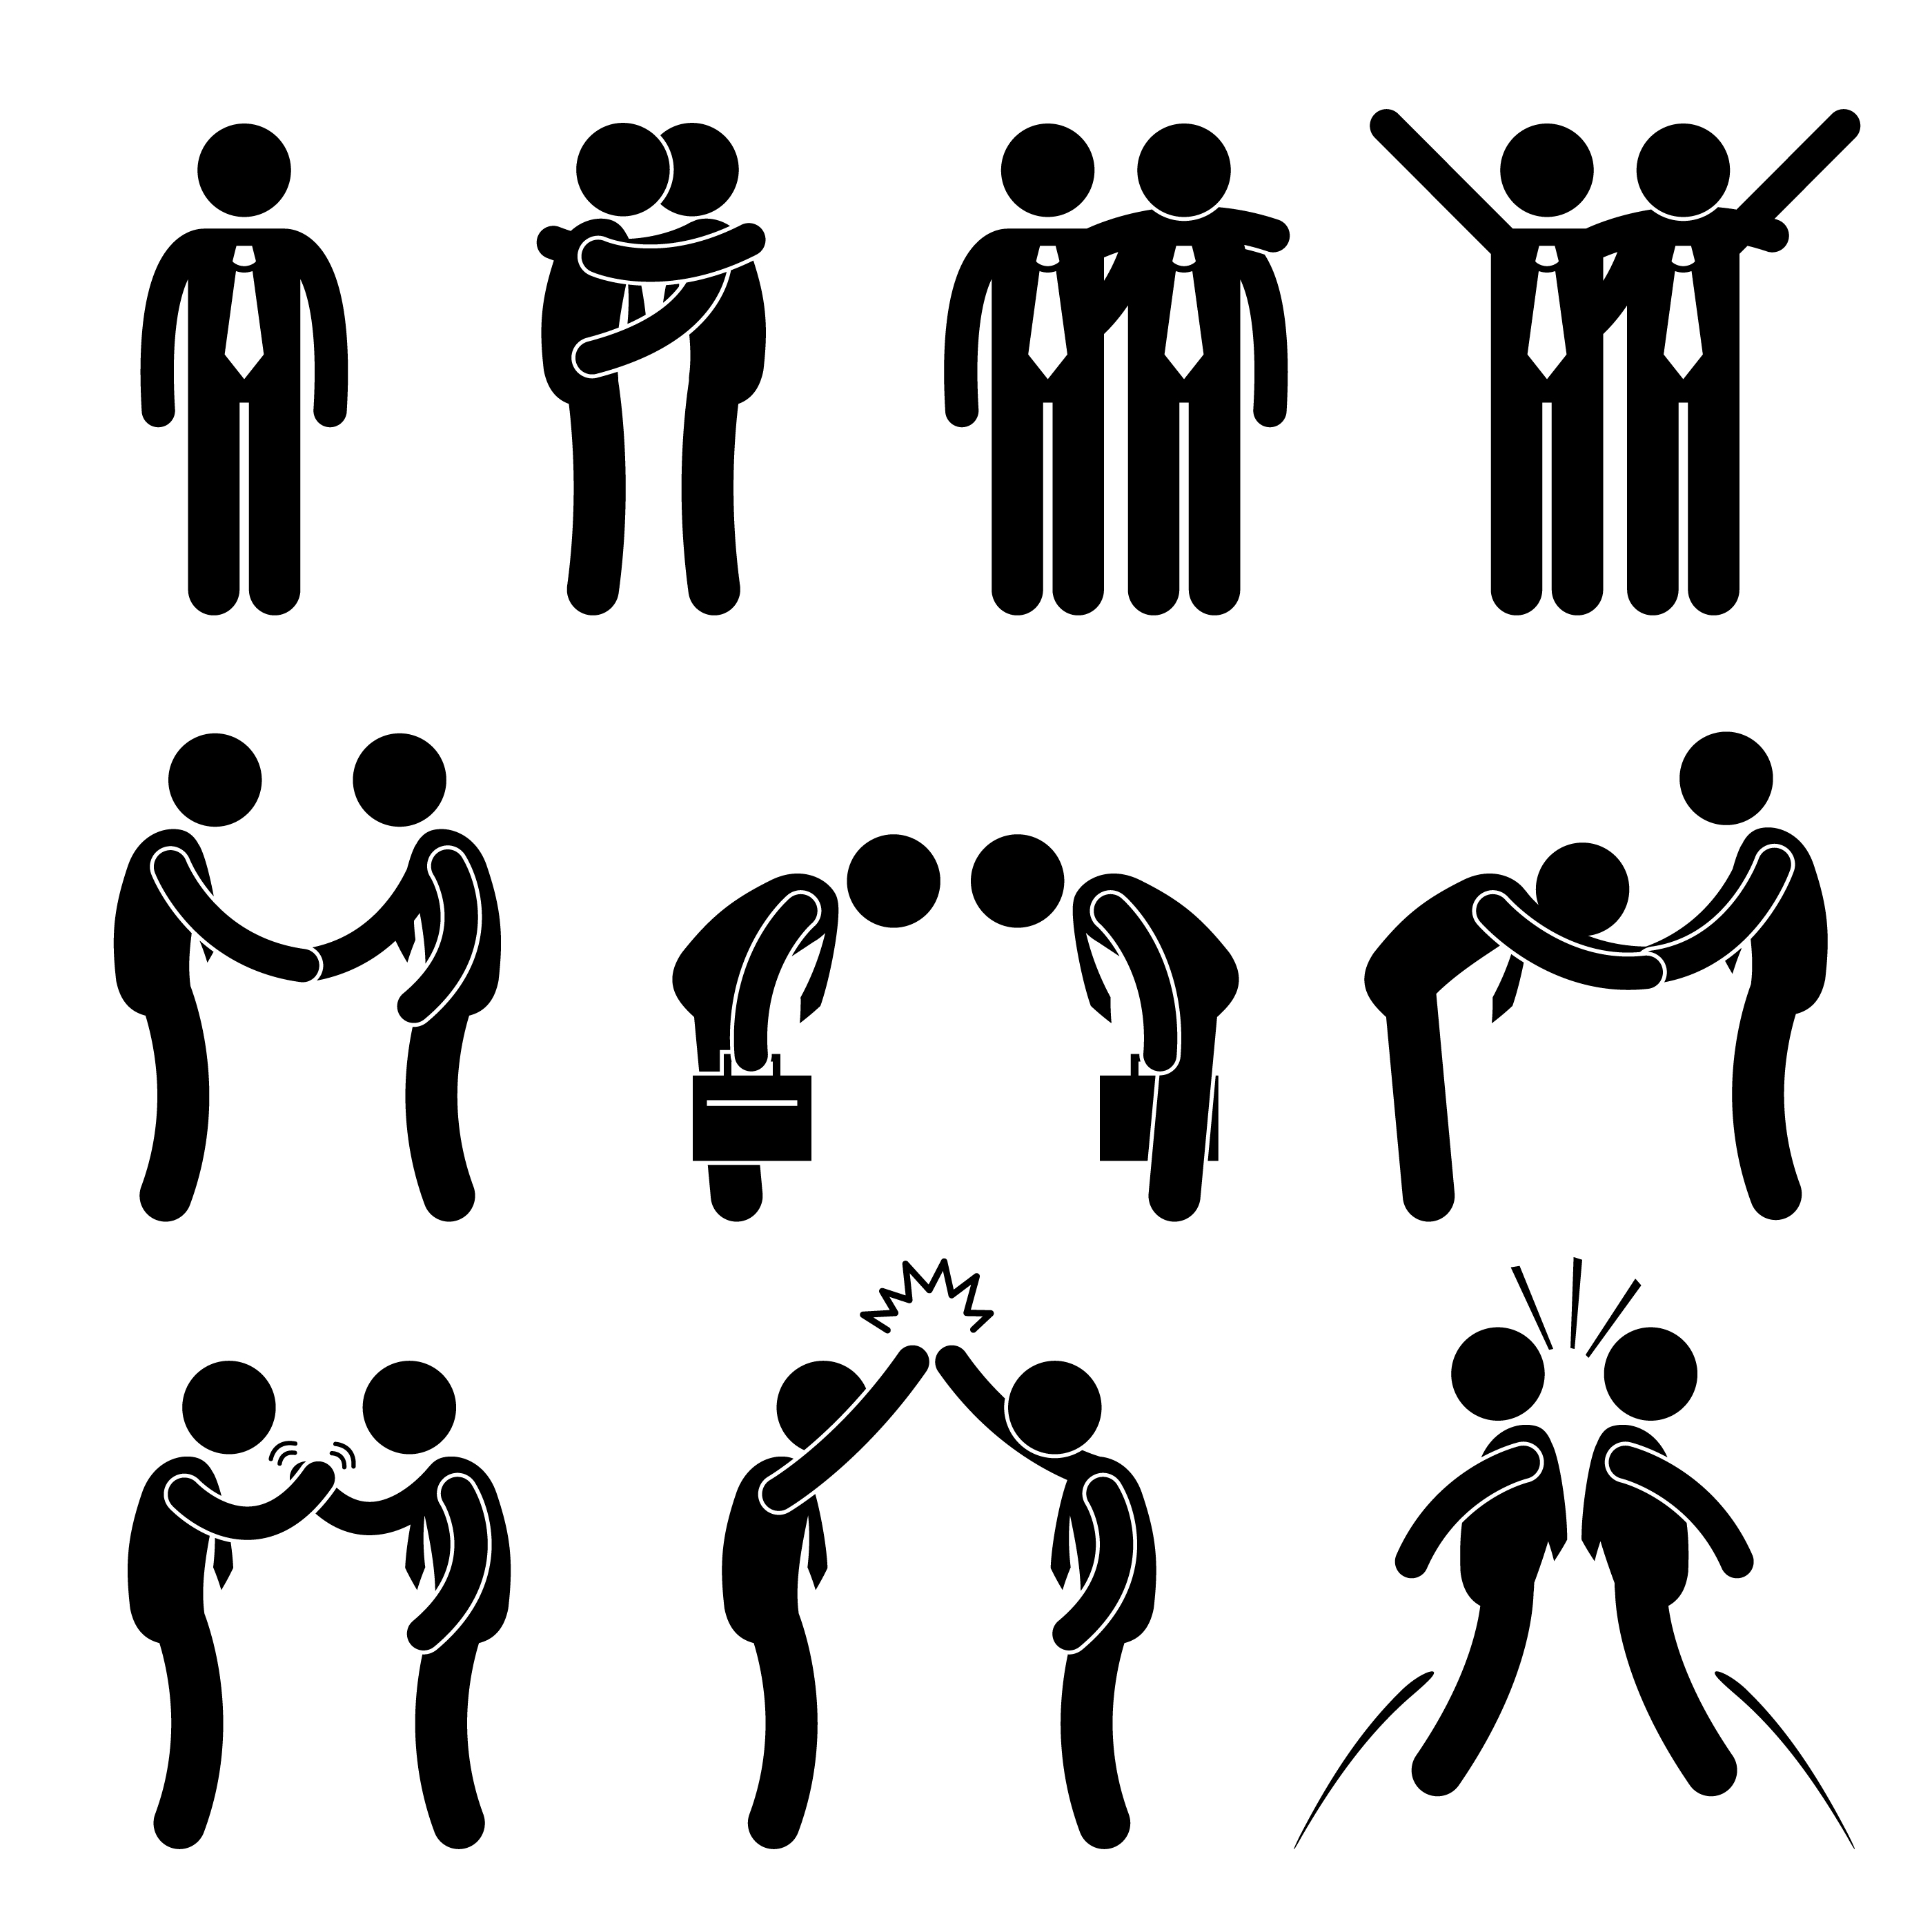 Download Business Manner Greetings Gesture Stick Figure Pictogram Icon. for...